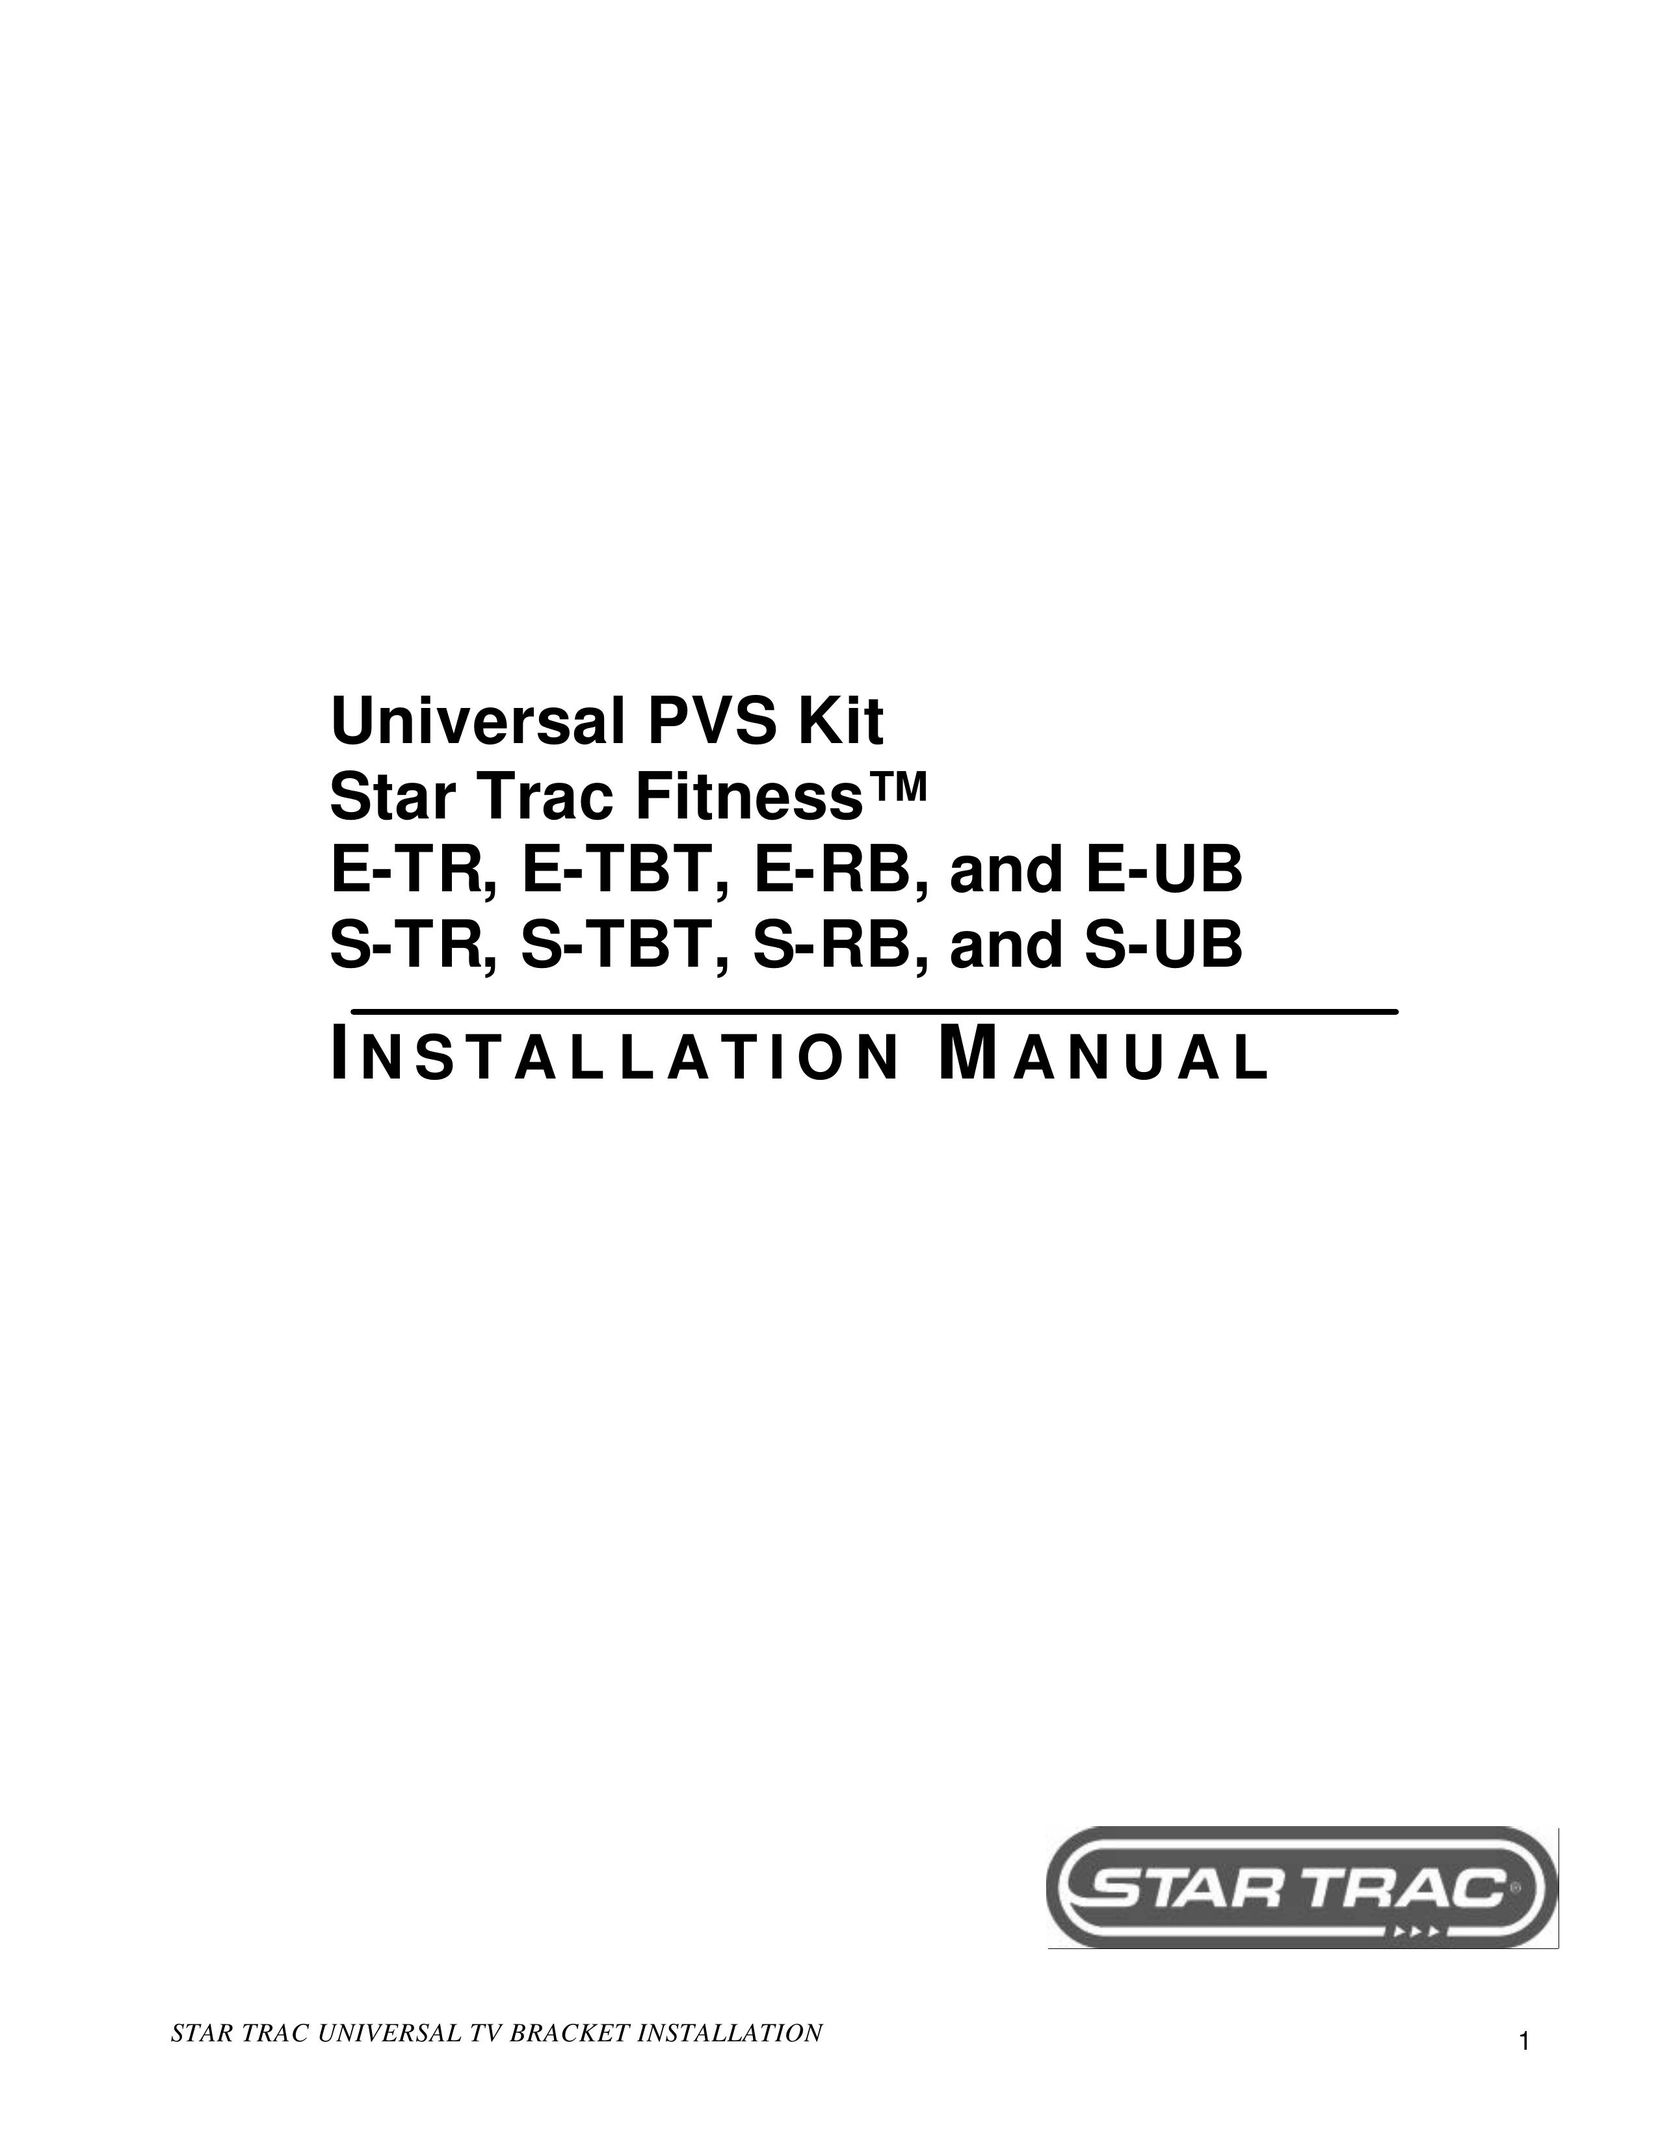 Star Trac S-TBT Fitness Electronics User Manual